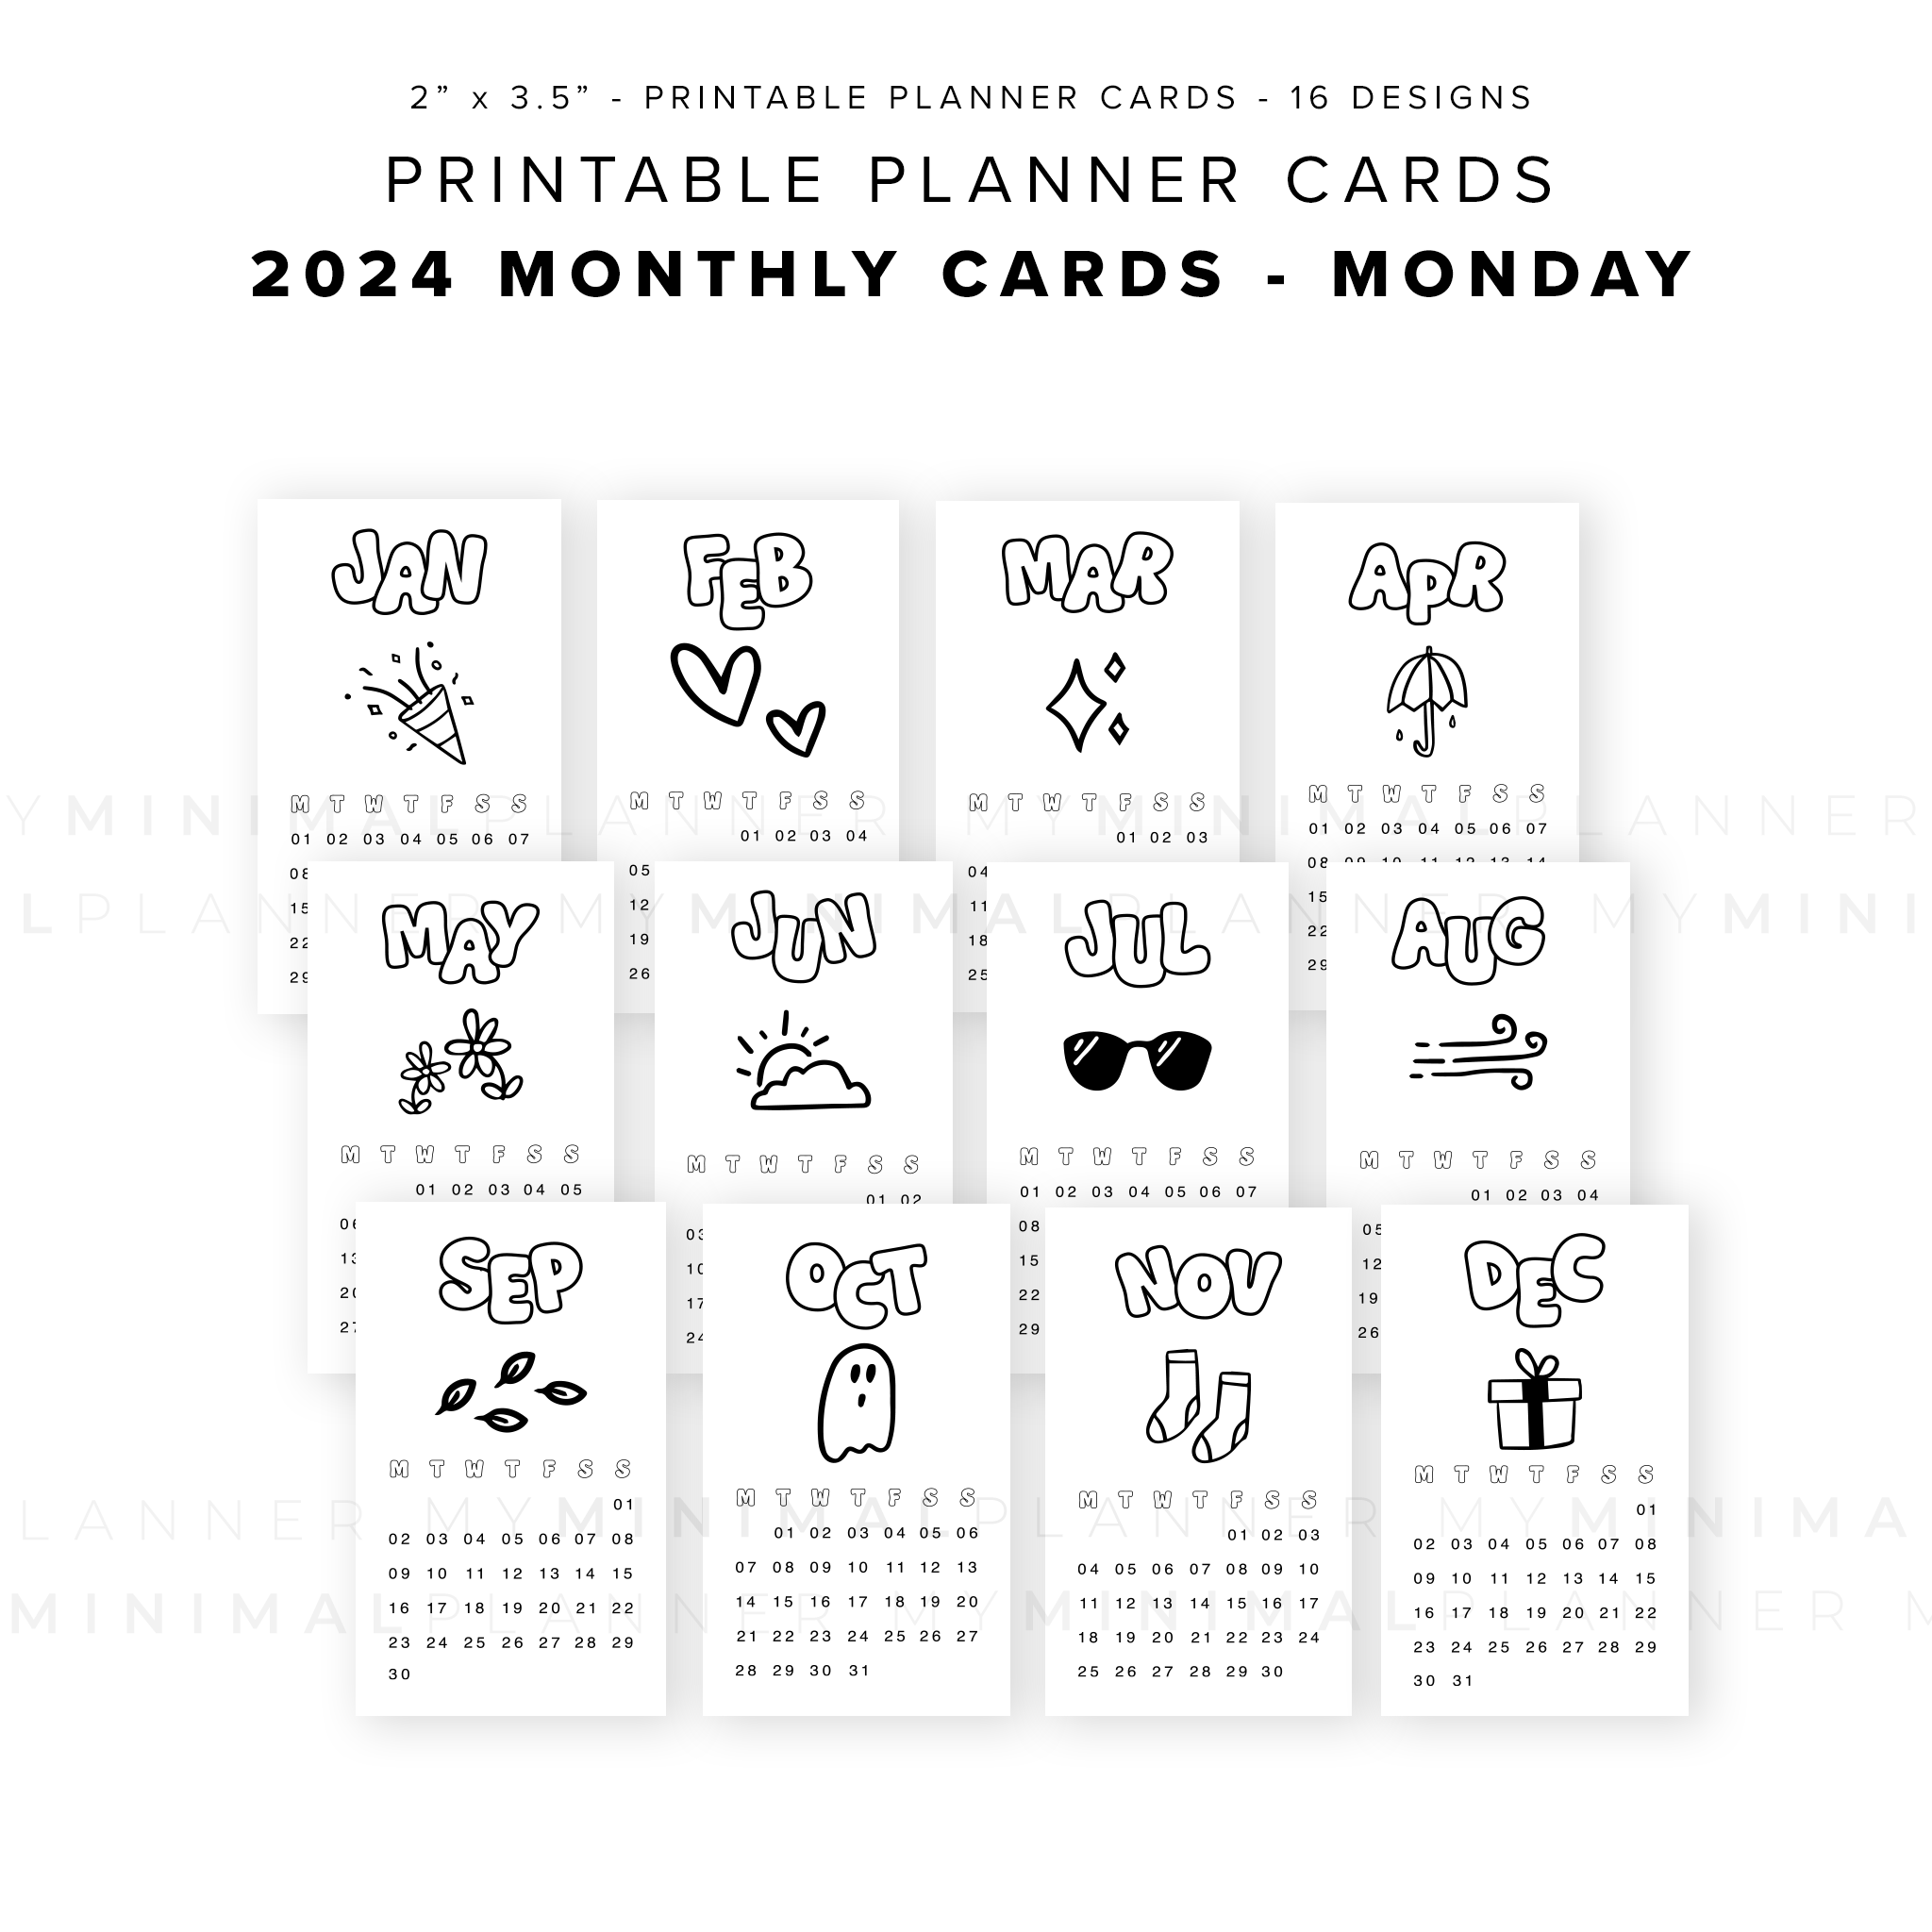 PPC24 - 2024 Monthly Planner Cards - Printable Planner Cards